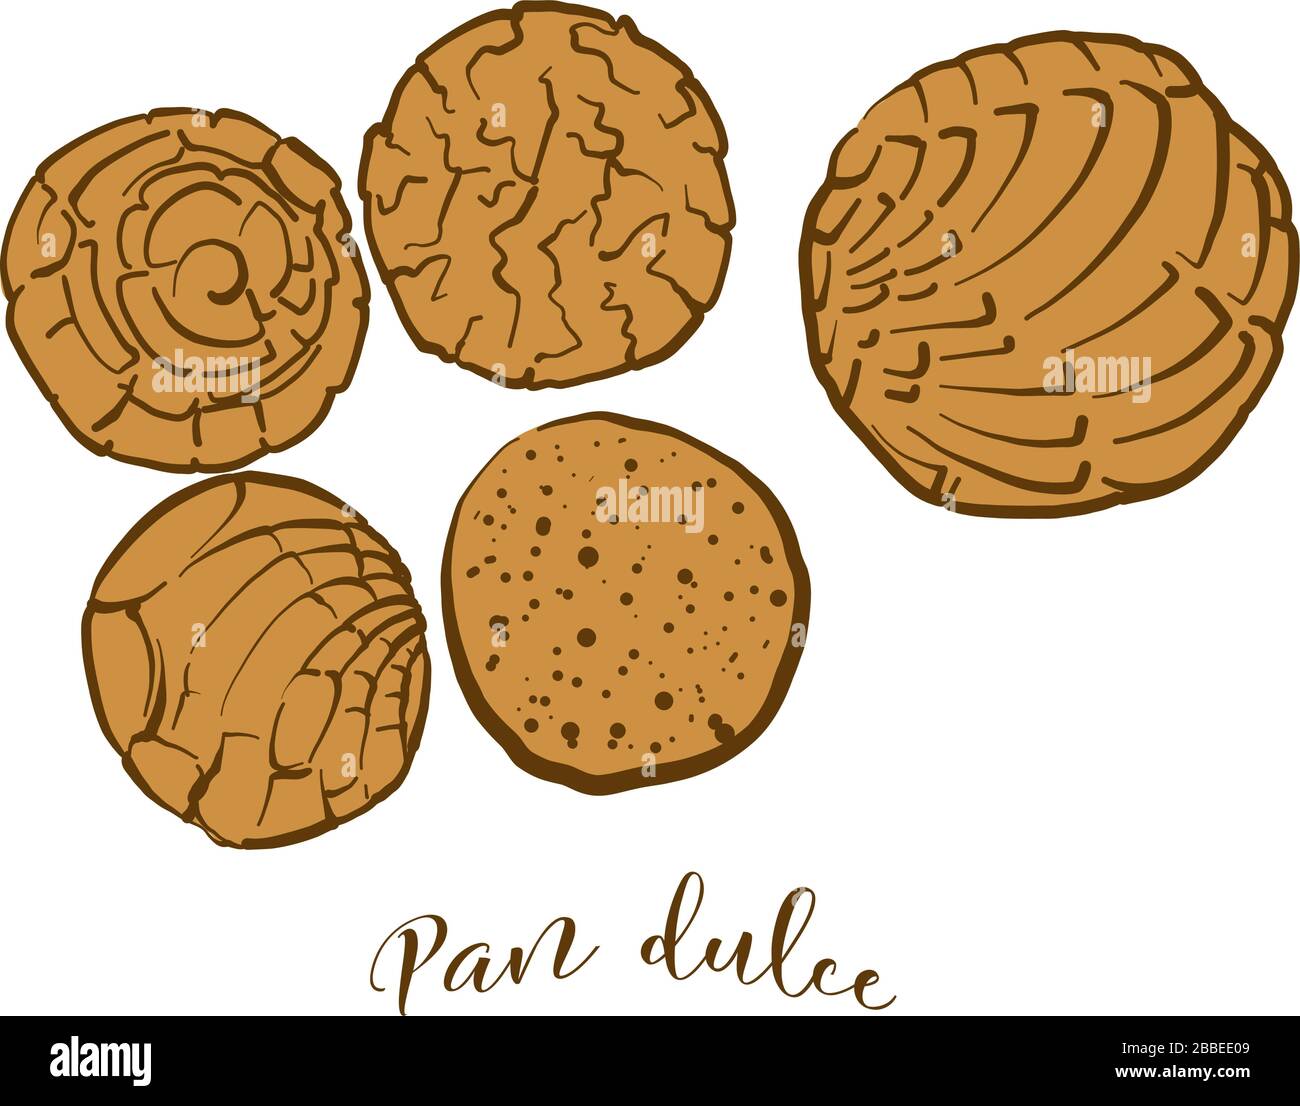 Colored drawing of Pan dulce bread. Vector illustration of Sweet bread